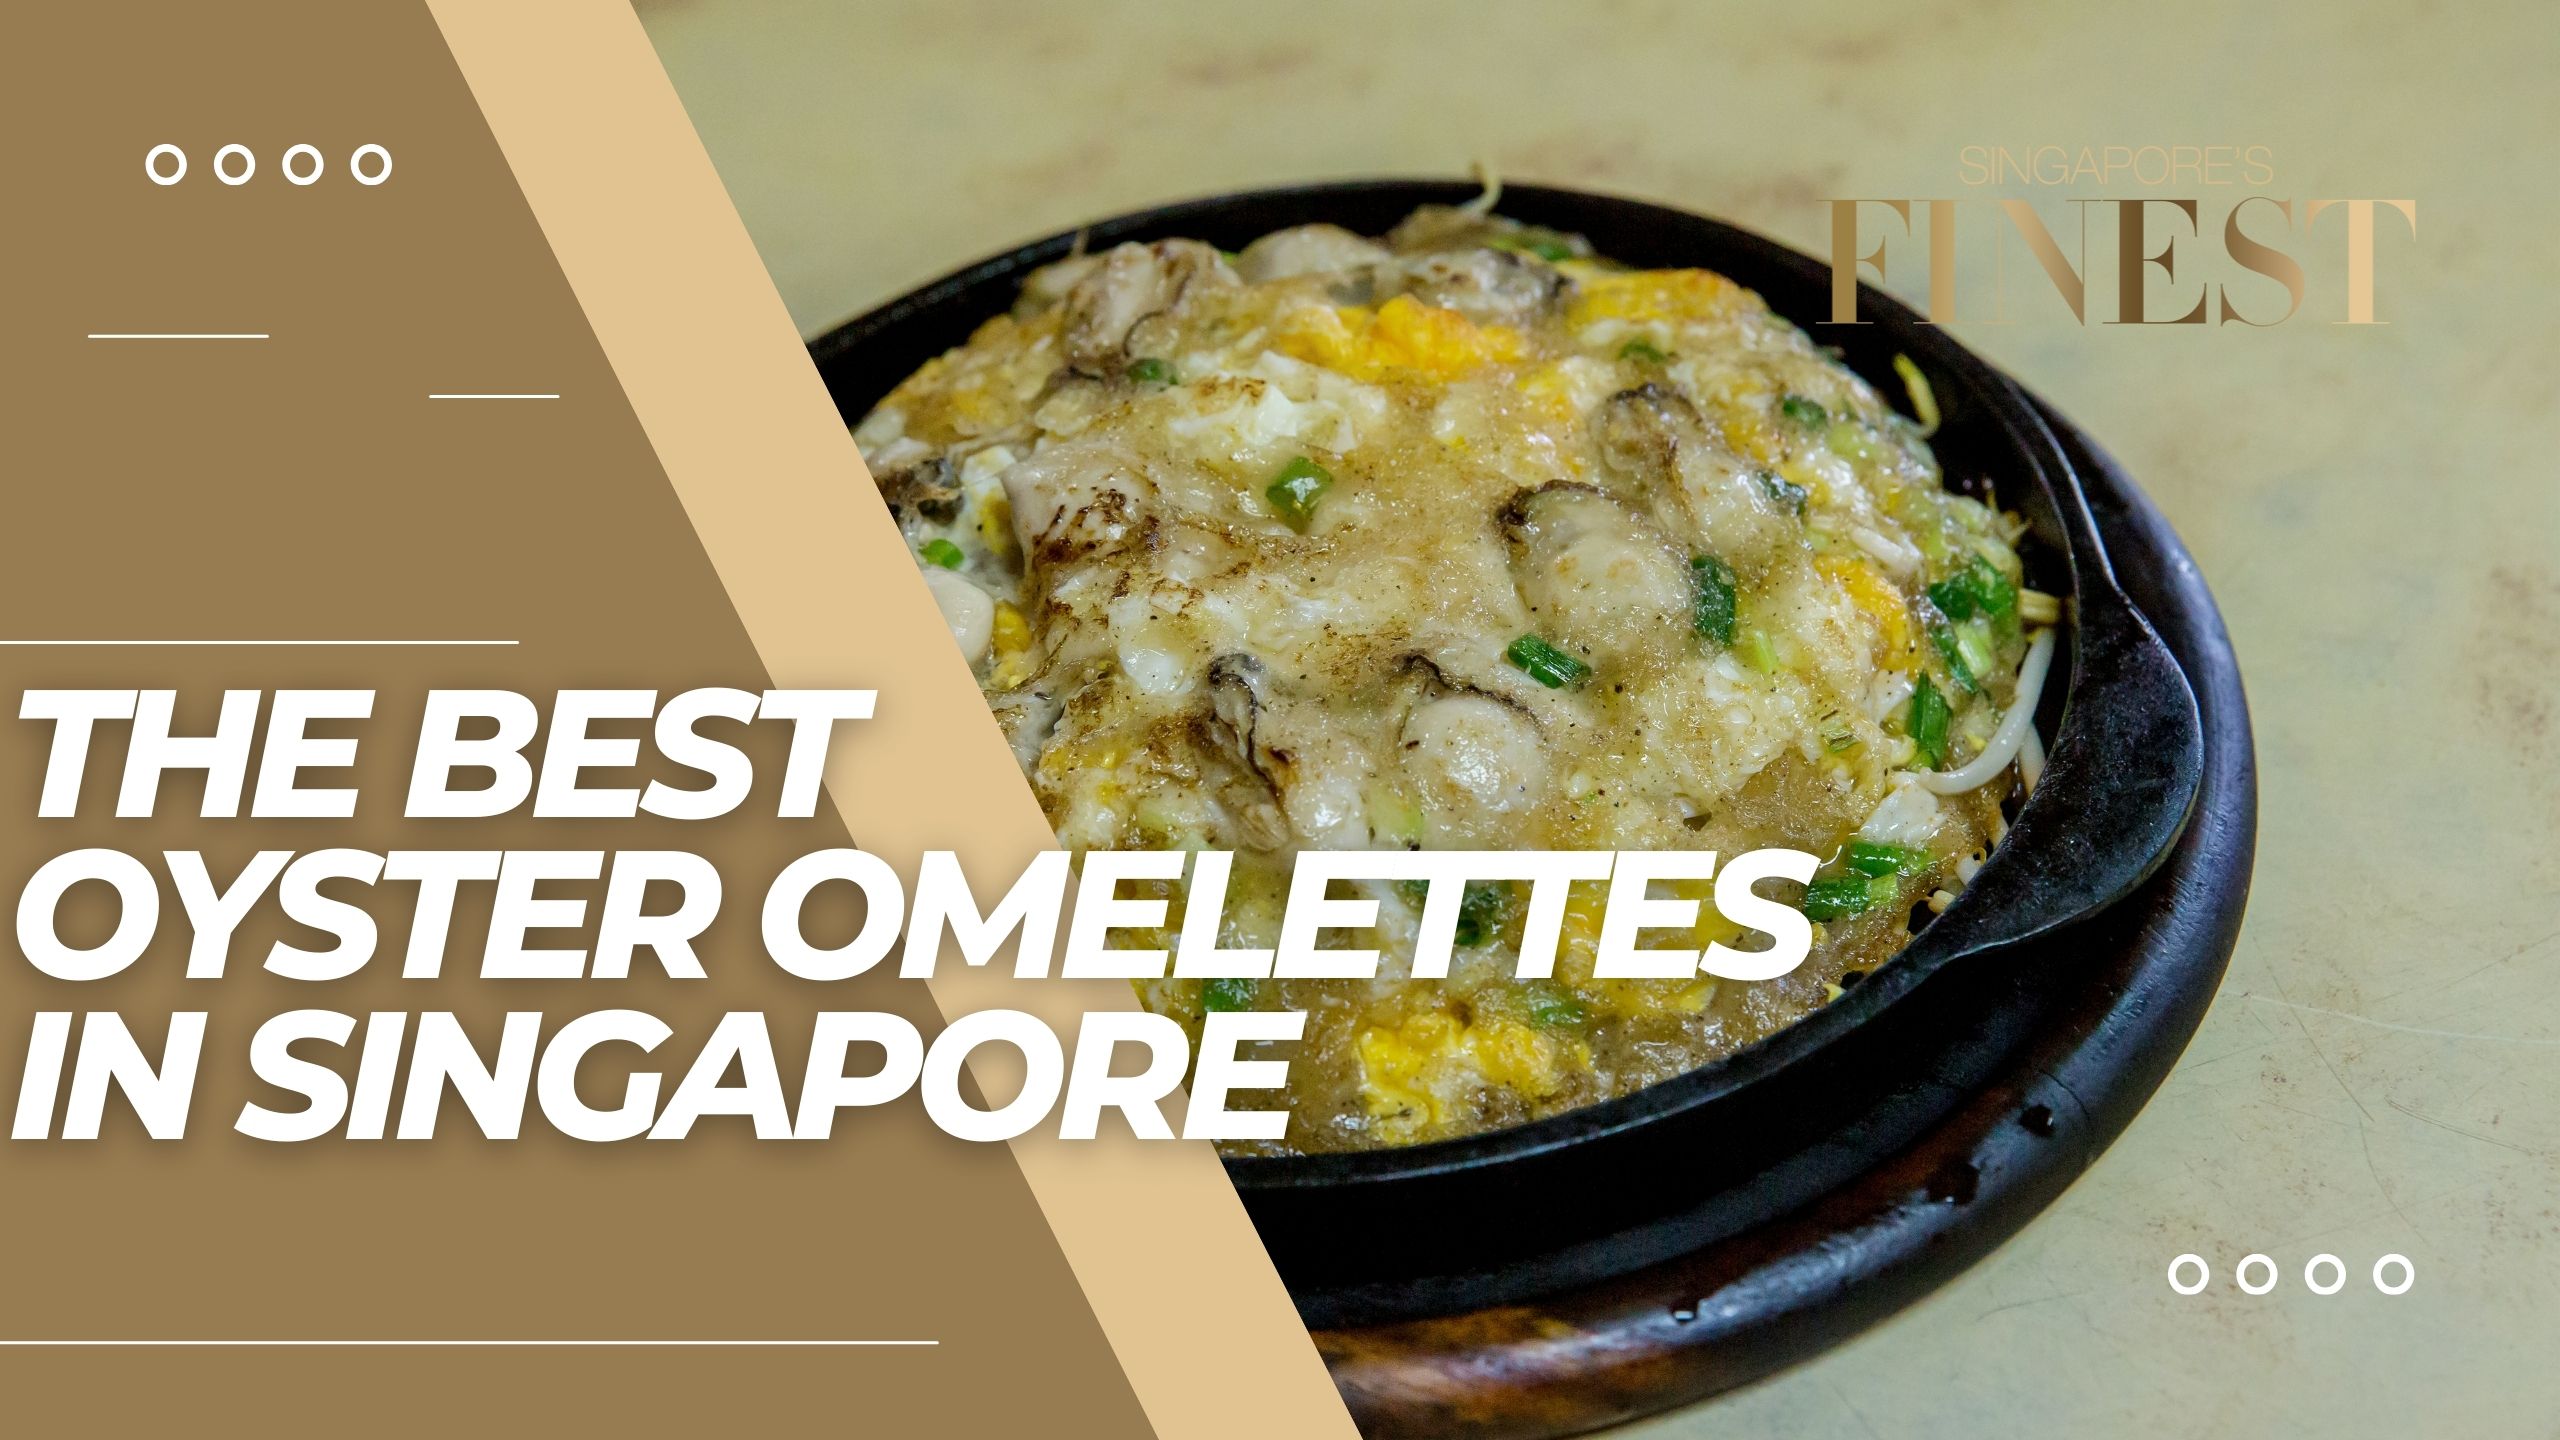 The Finest Oyster Omelettes in Singapore